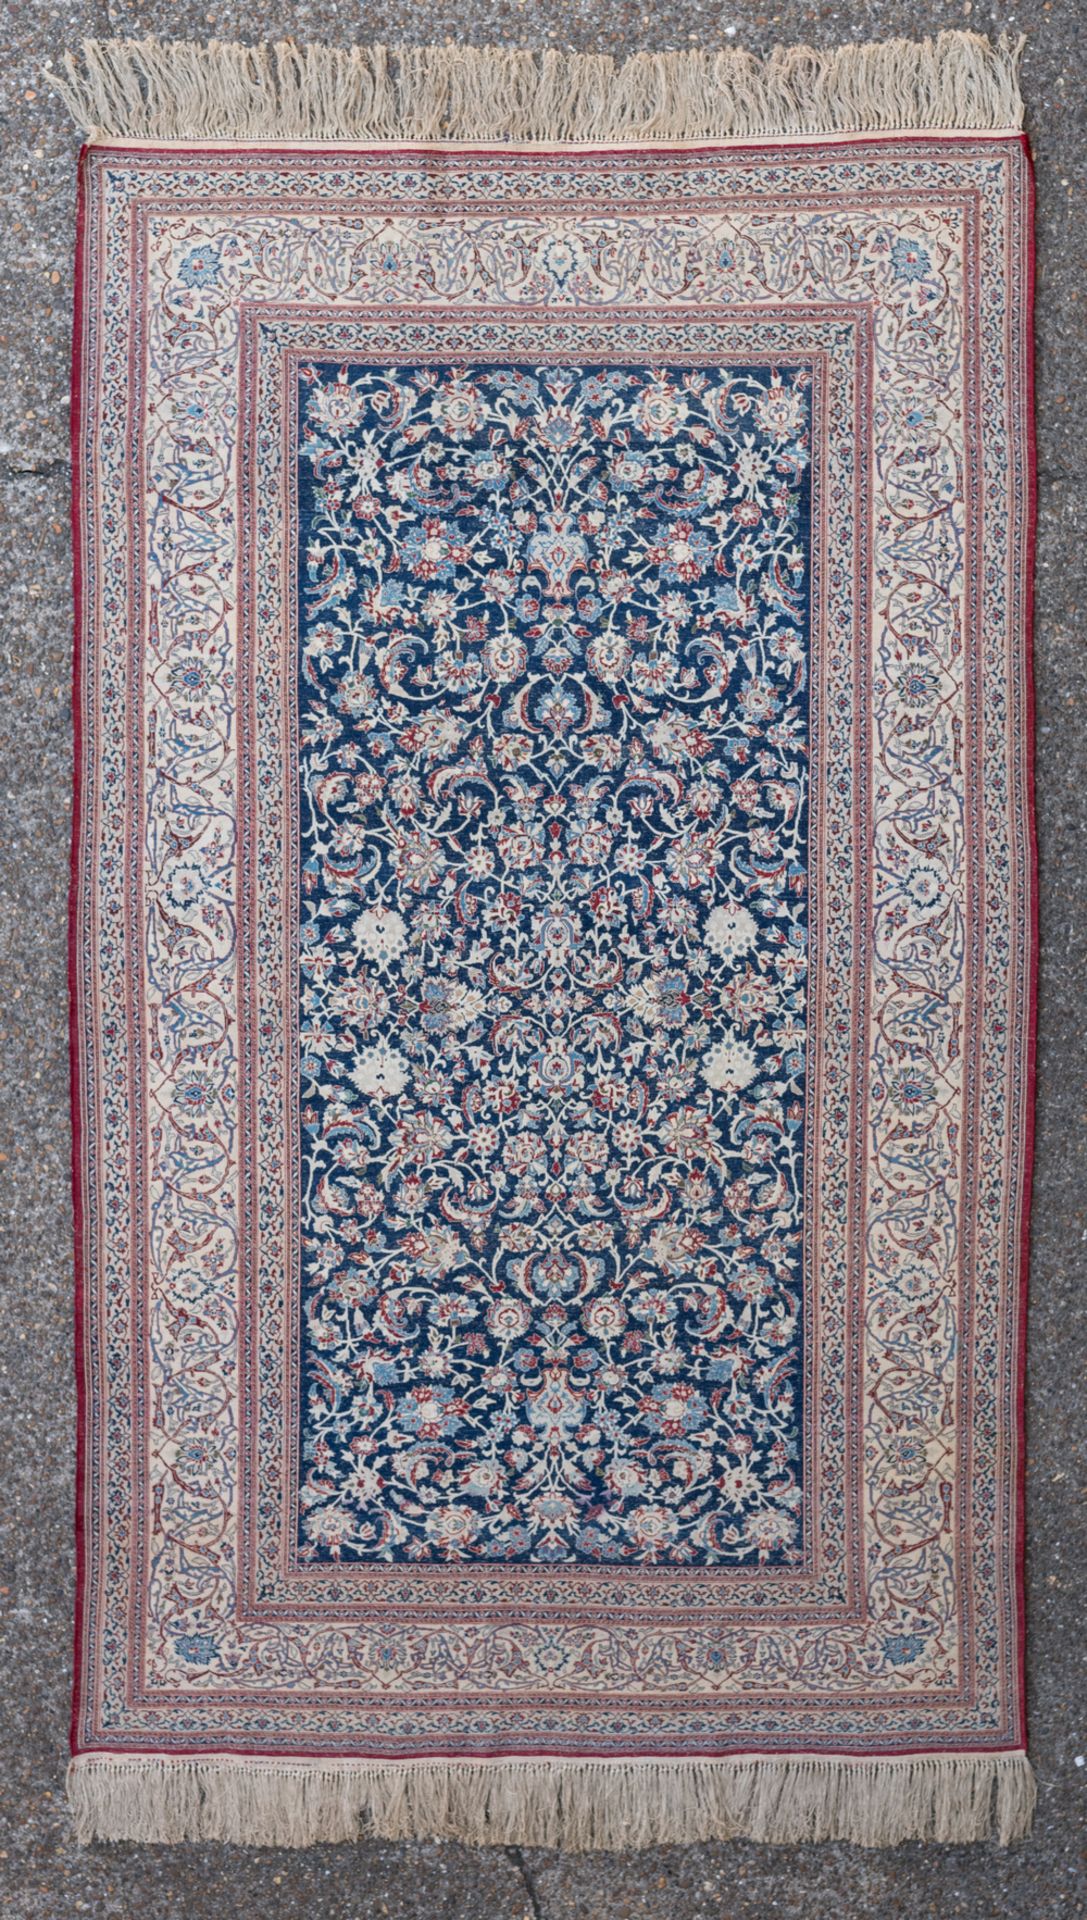 A fine Oriental floral decorated silk rug, 159 x 276 cm - Image 2 of 3